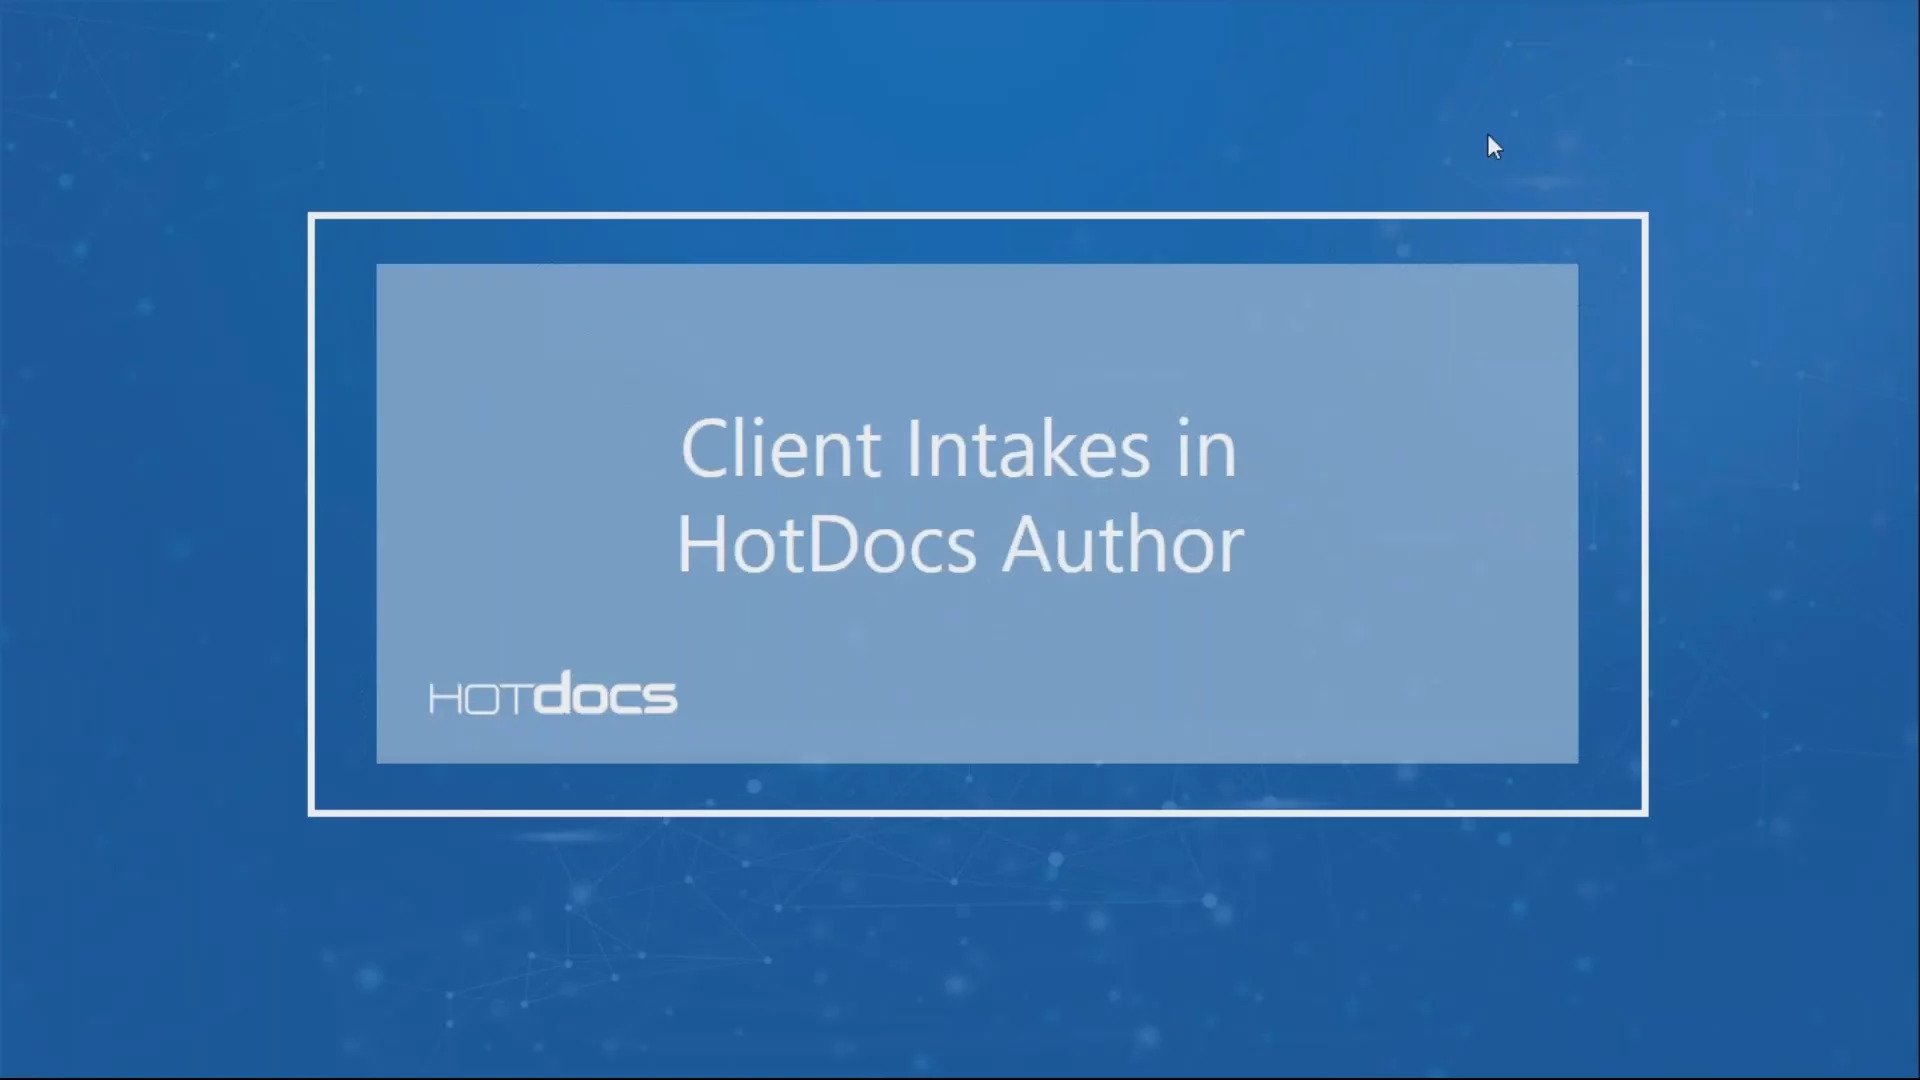 Client Intake in HotDocs Author